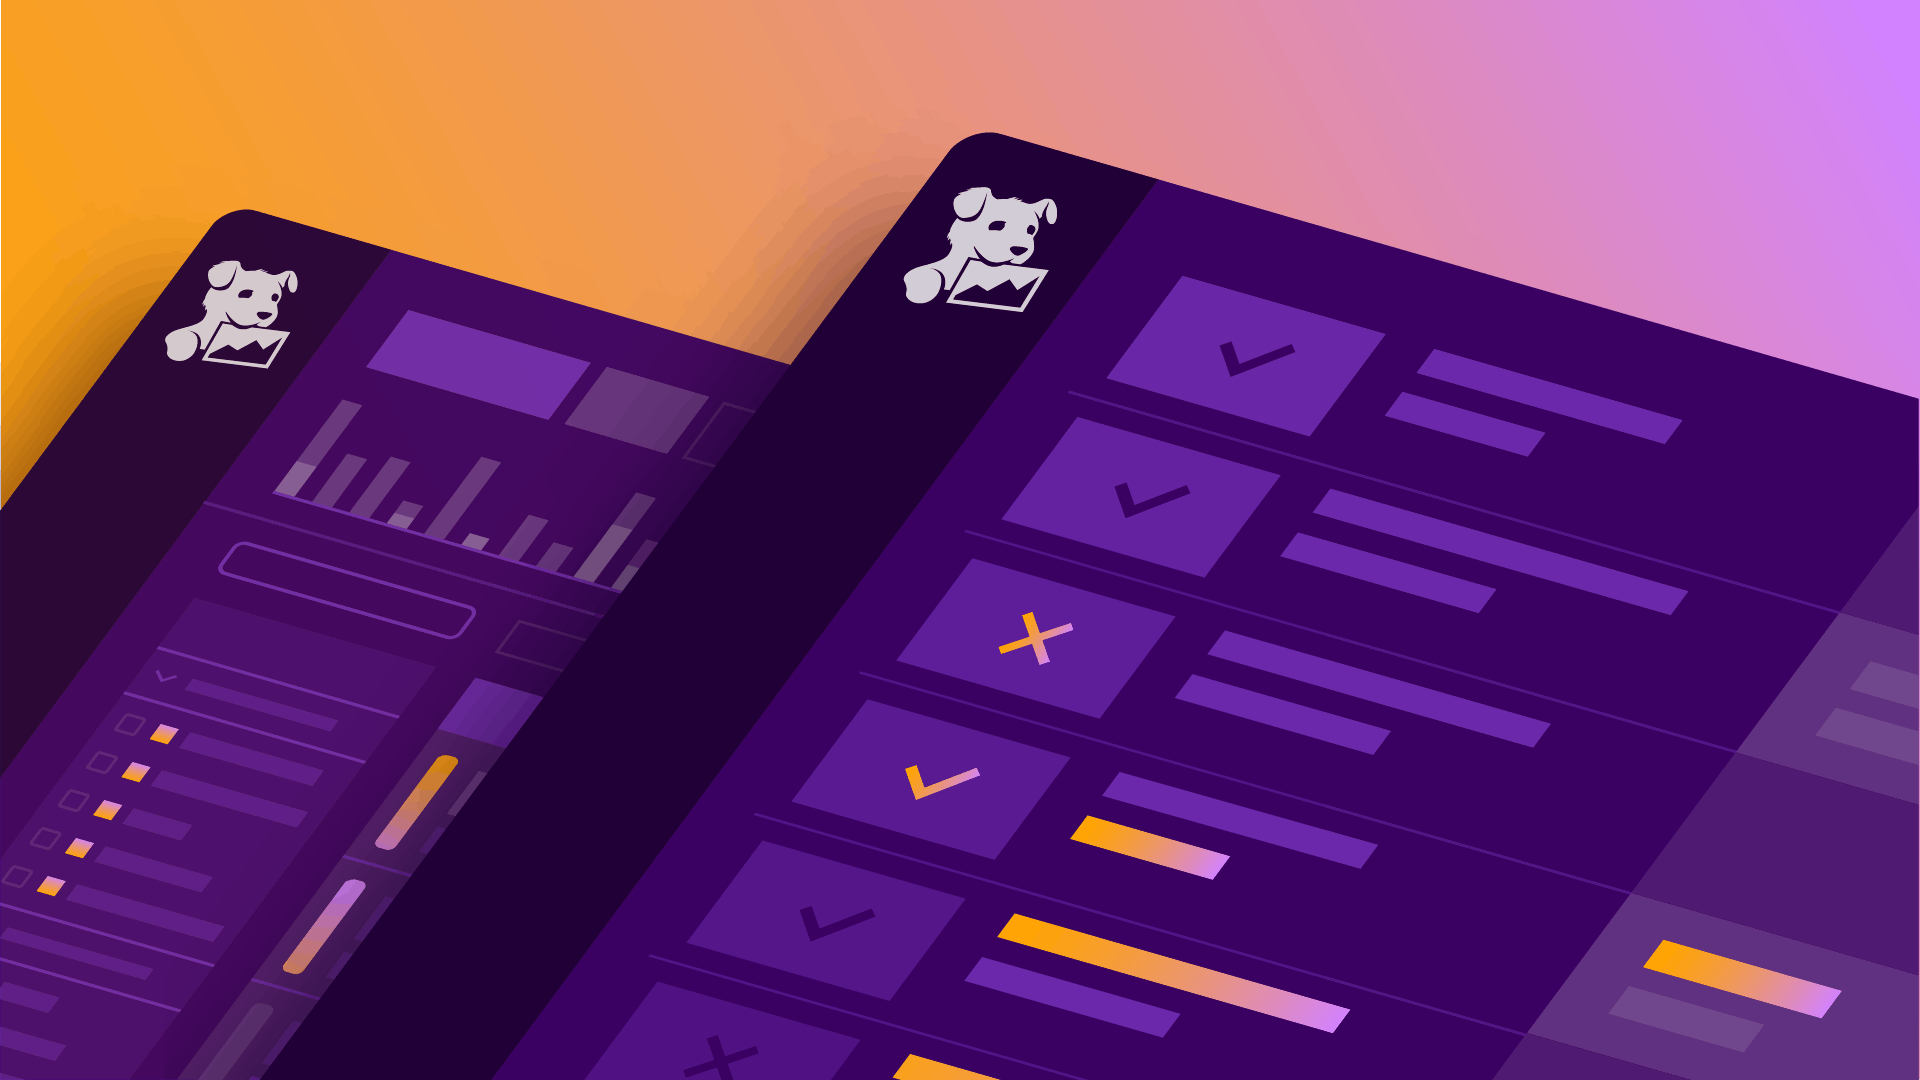 A highly detailed animated illustration, depicting simplified representations of dashboards within the Datadog app in purple and orange hues.